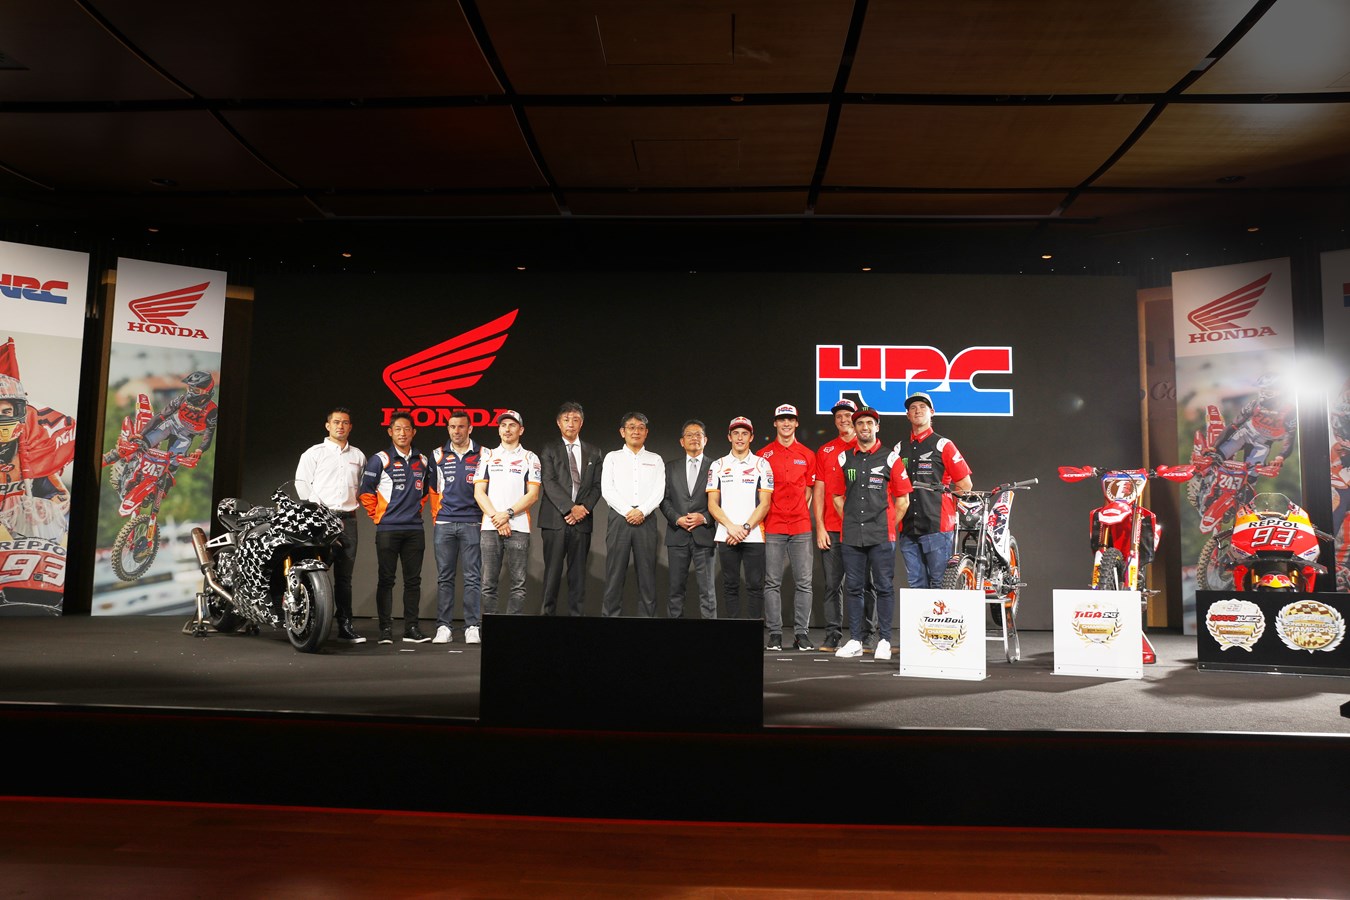 Honda Announces Plans for 2020 Motorcycle Motorsports Activities - Honda’s Participation in World Championship Racing and Dakar Rally 2020